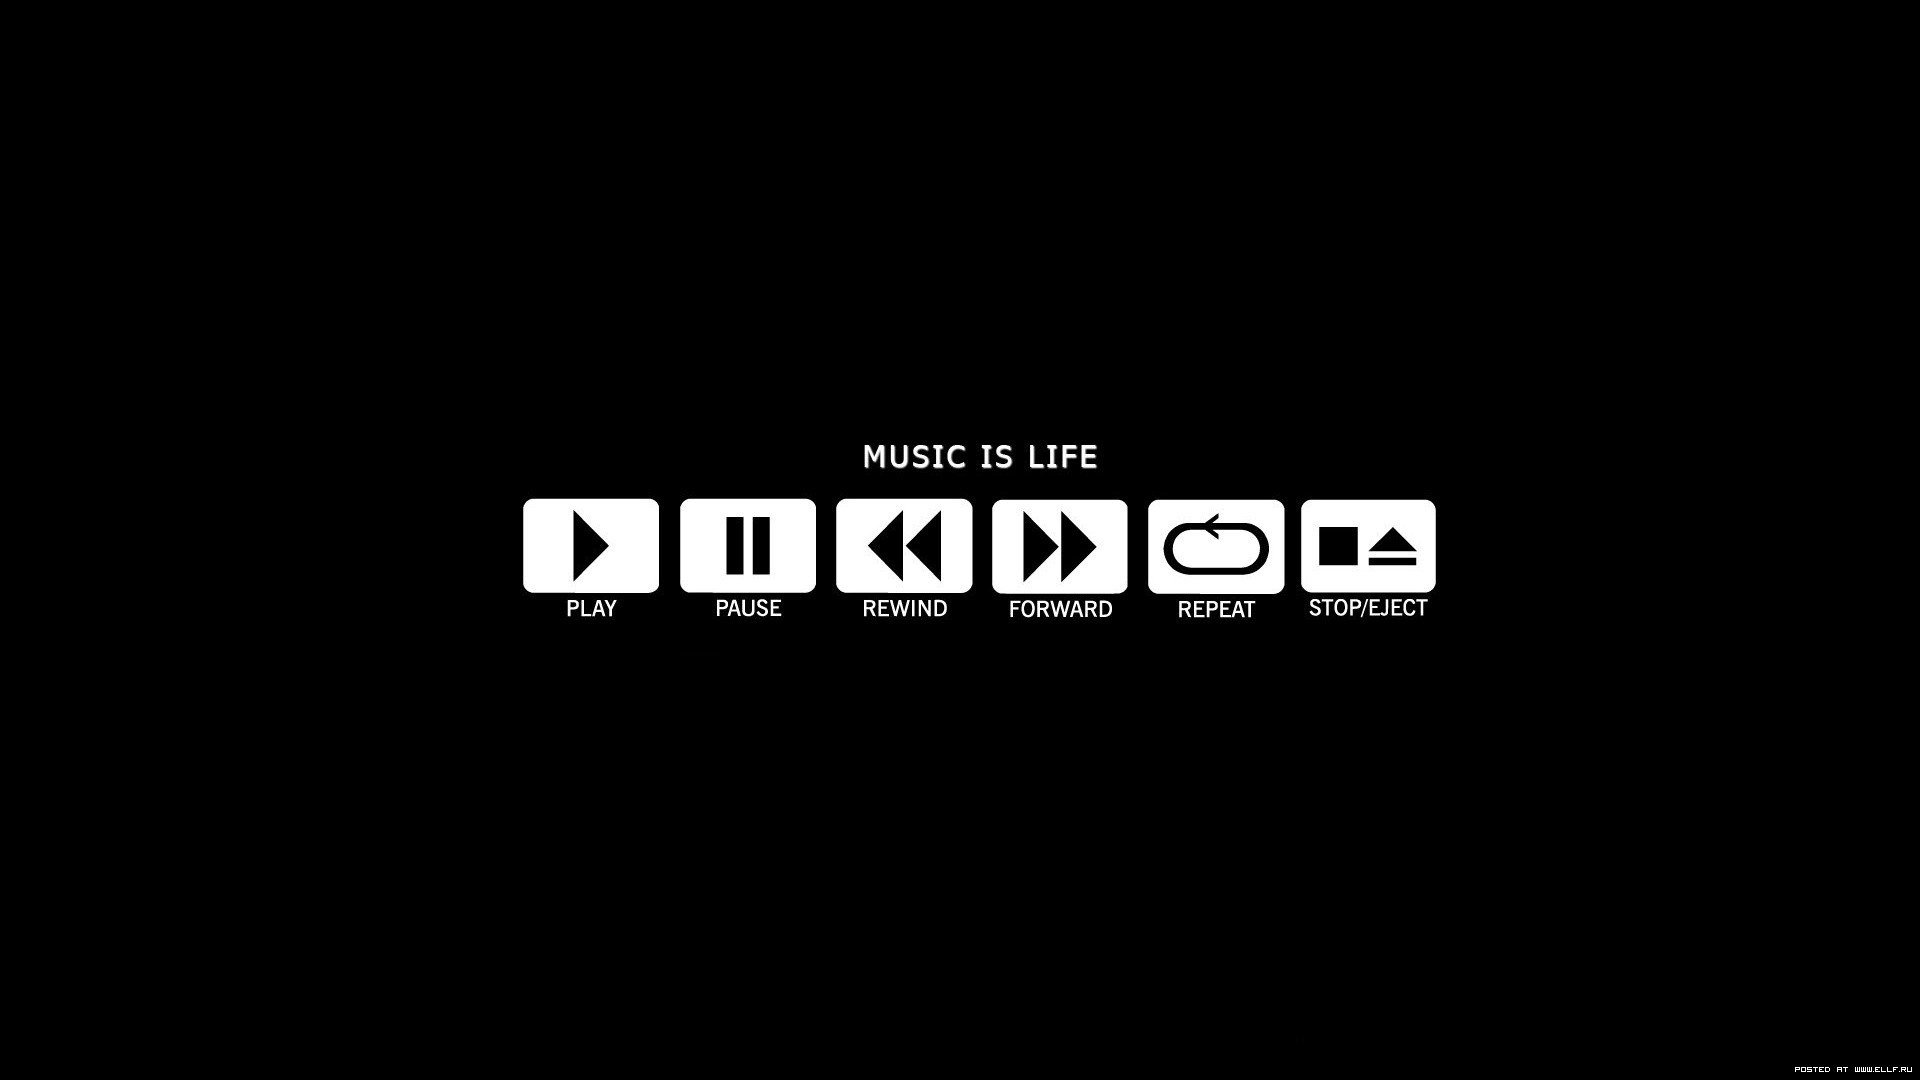 Wallpaper For Music Is Life Hd Best Pc Images Smartphone 1920x1080